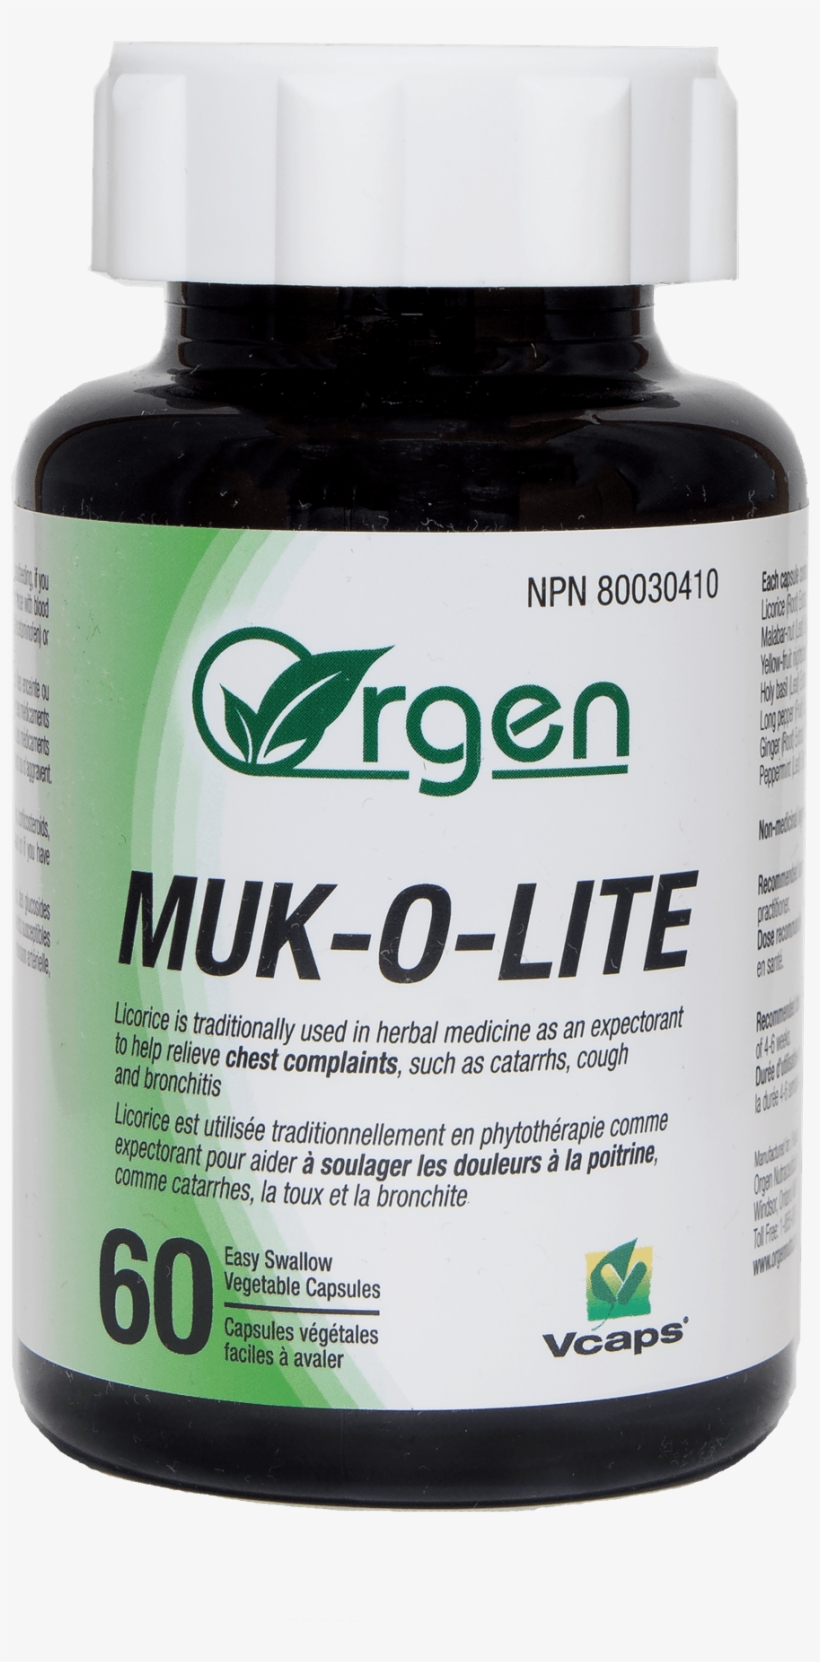 Picture Of Muk O Lite - Brand, transparent png #3514349